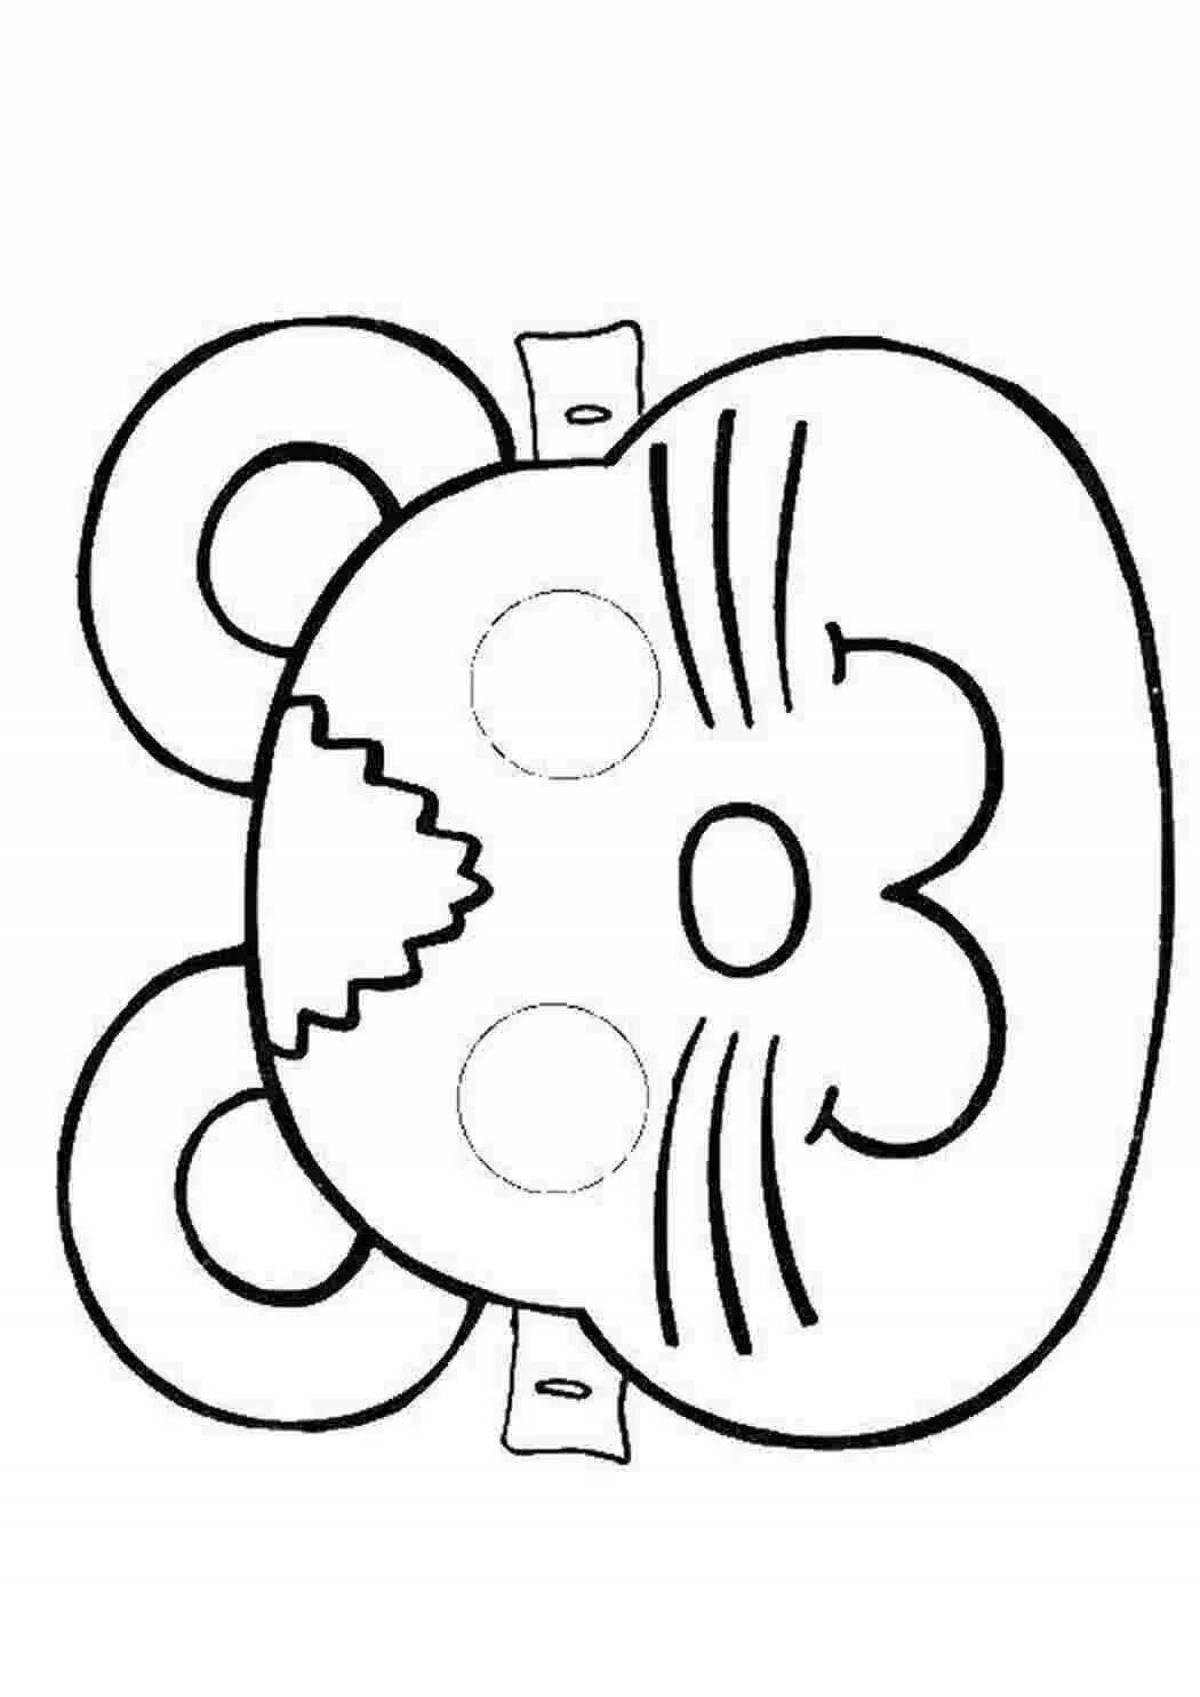 Exquisite mouse head coloring page